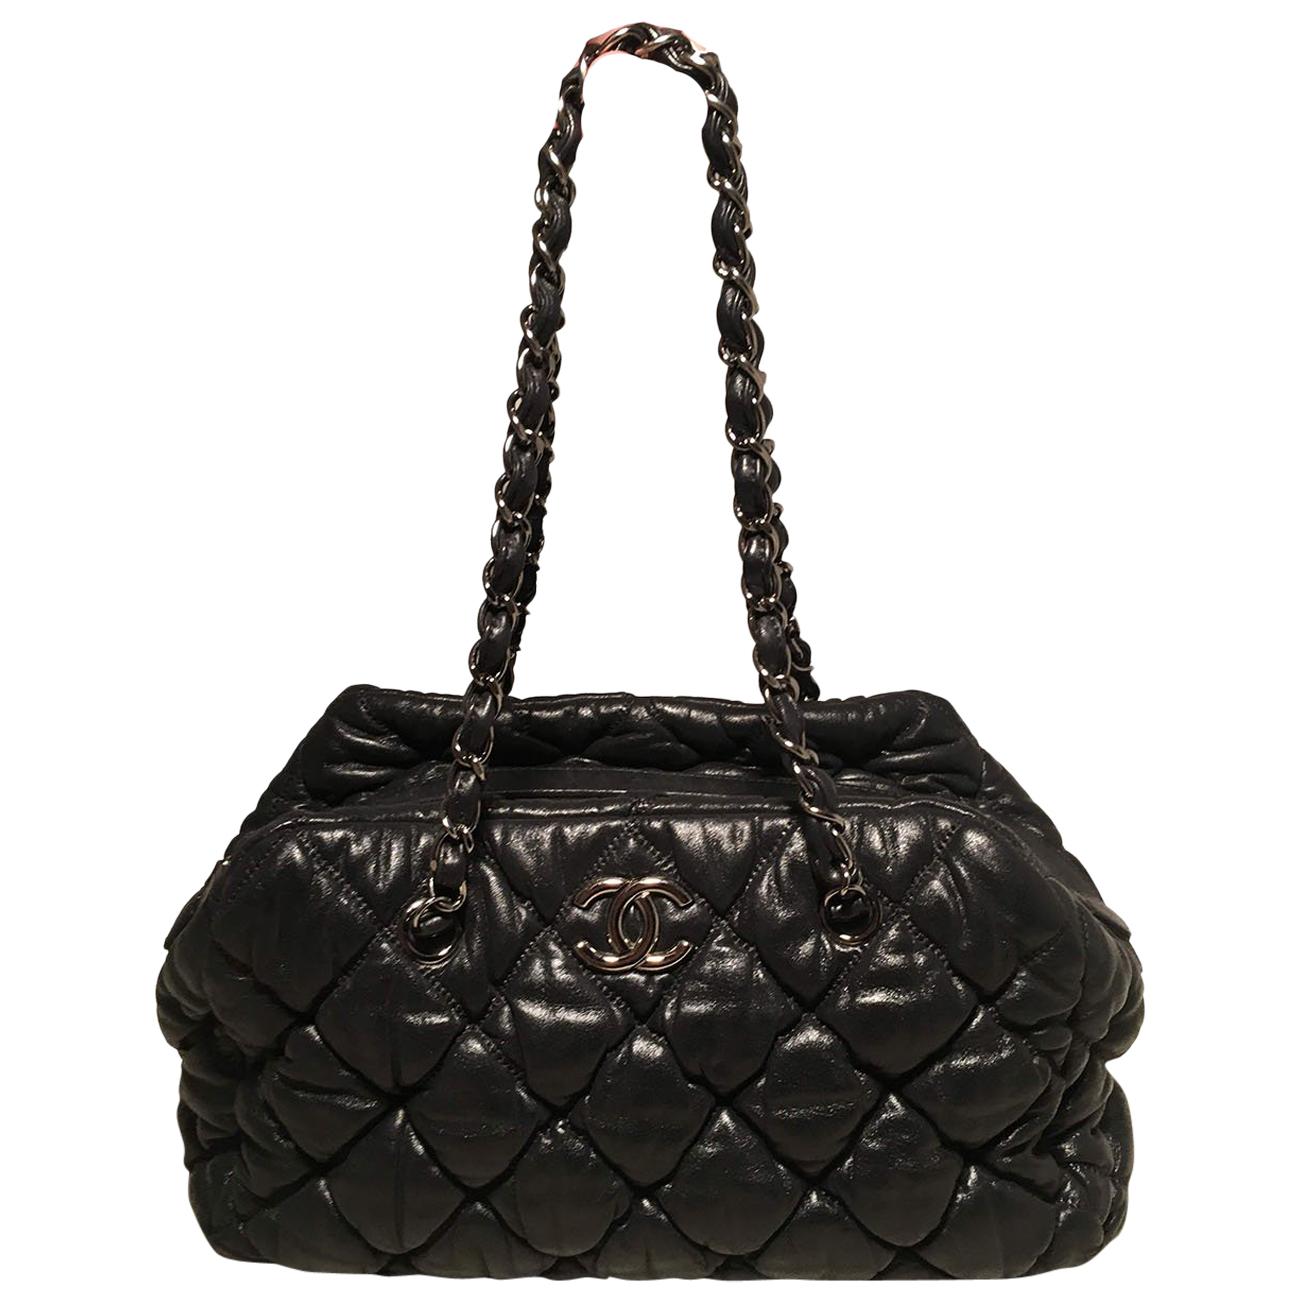 Chanel Dark Gray Quilted Puffy Leather Shoulder Bag Tote